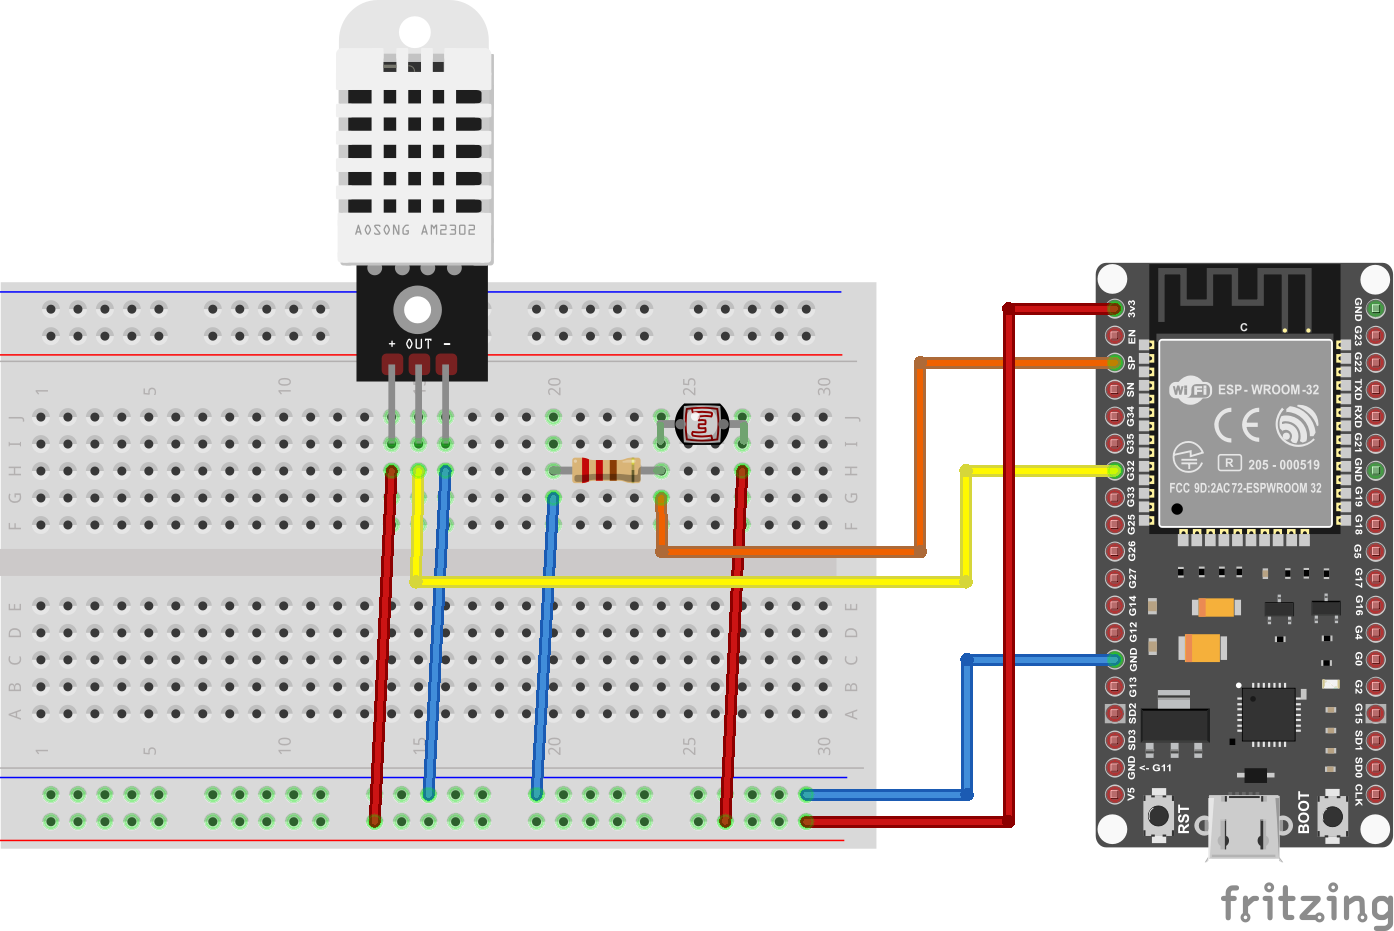 Circuit with the DHT22 temperature sensor and and LDR light for measuring light intensity